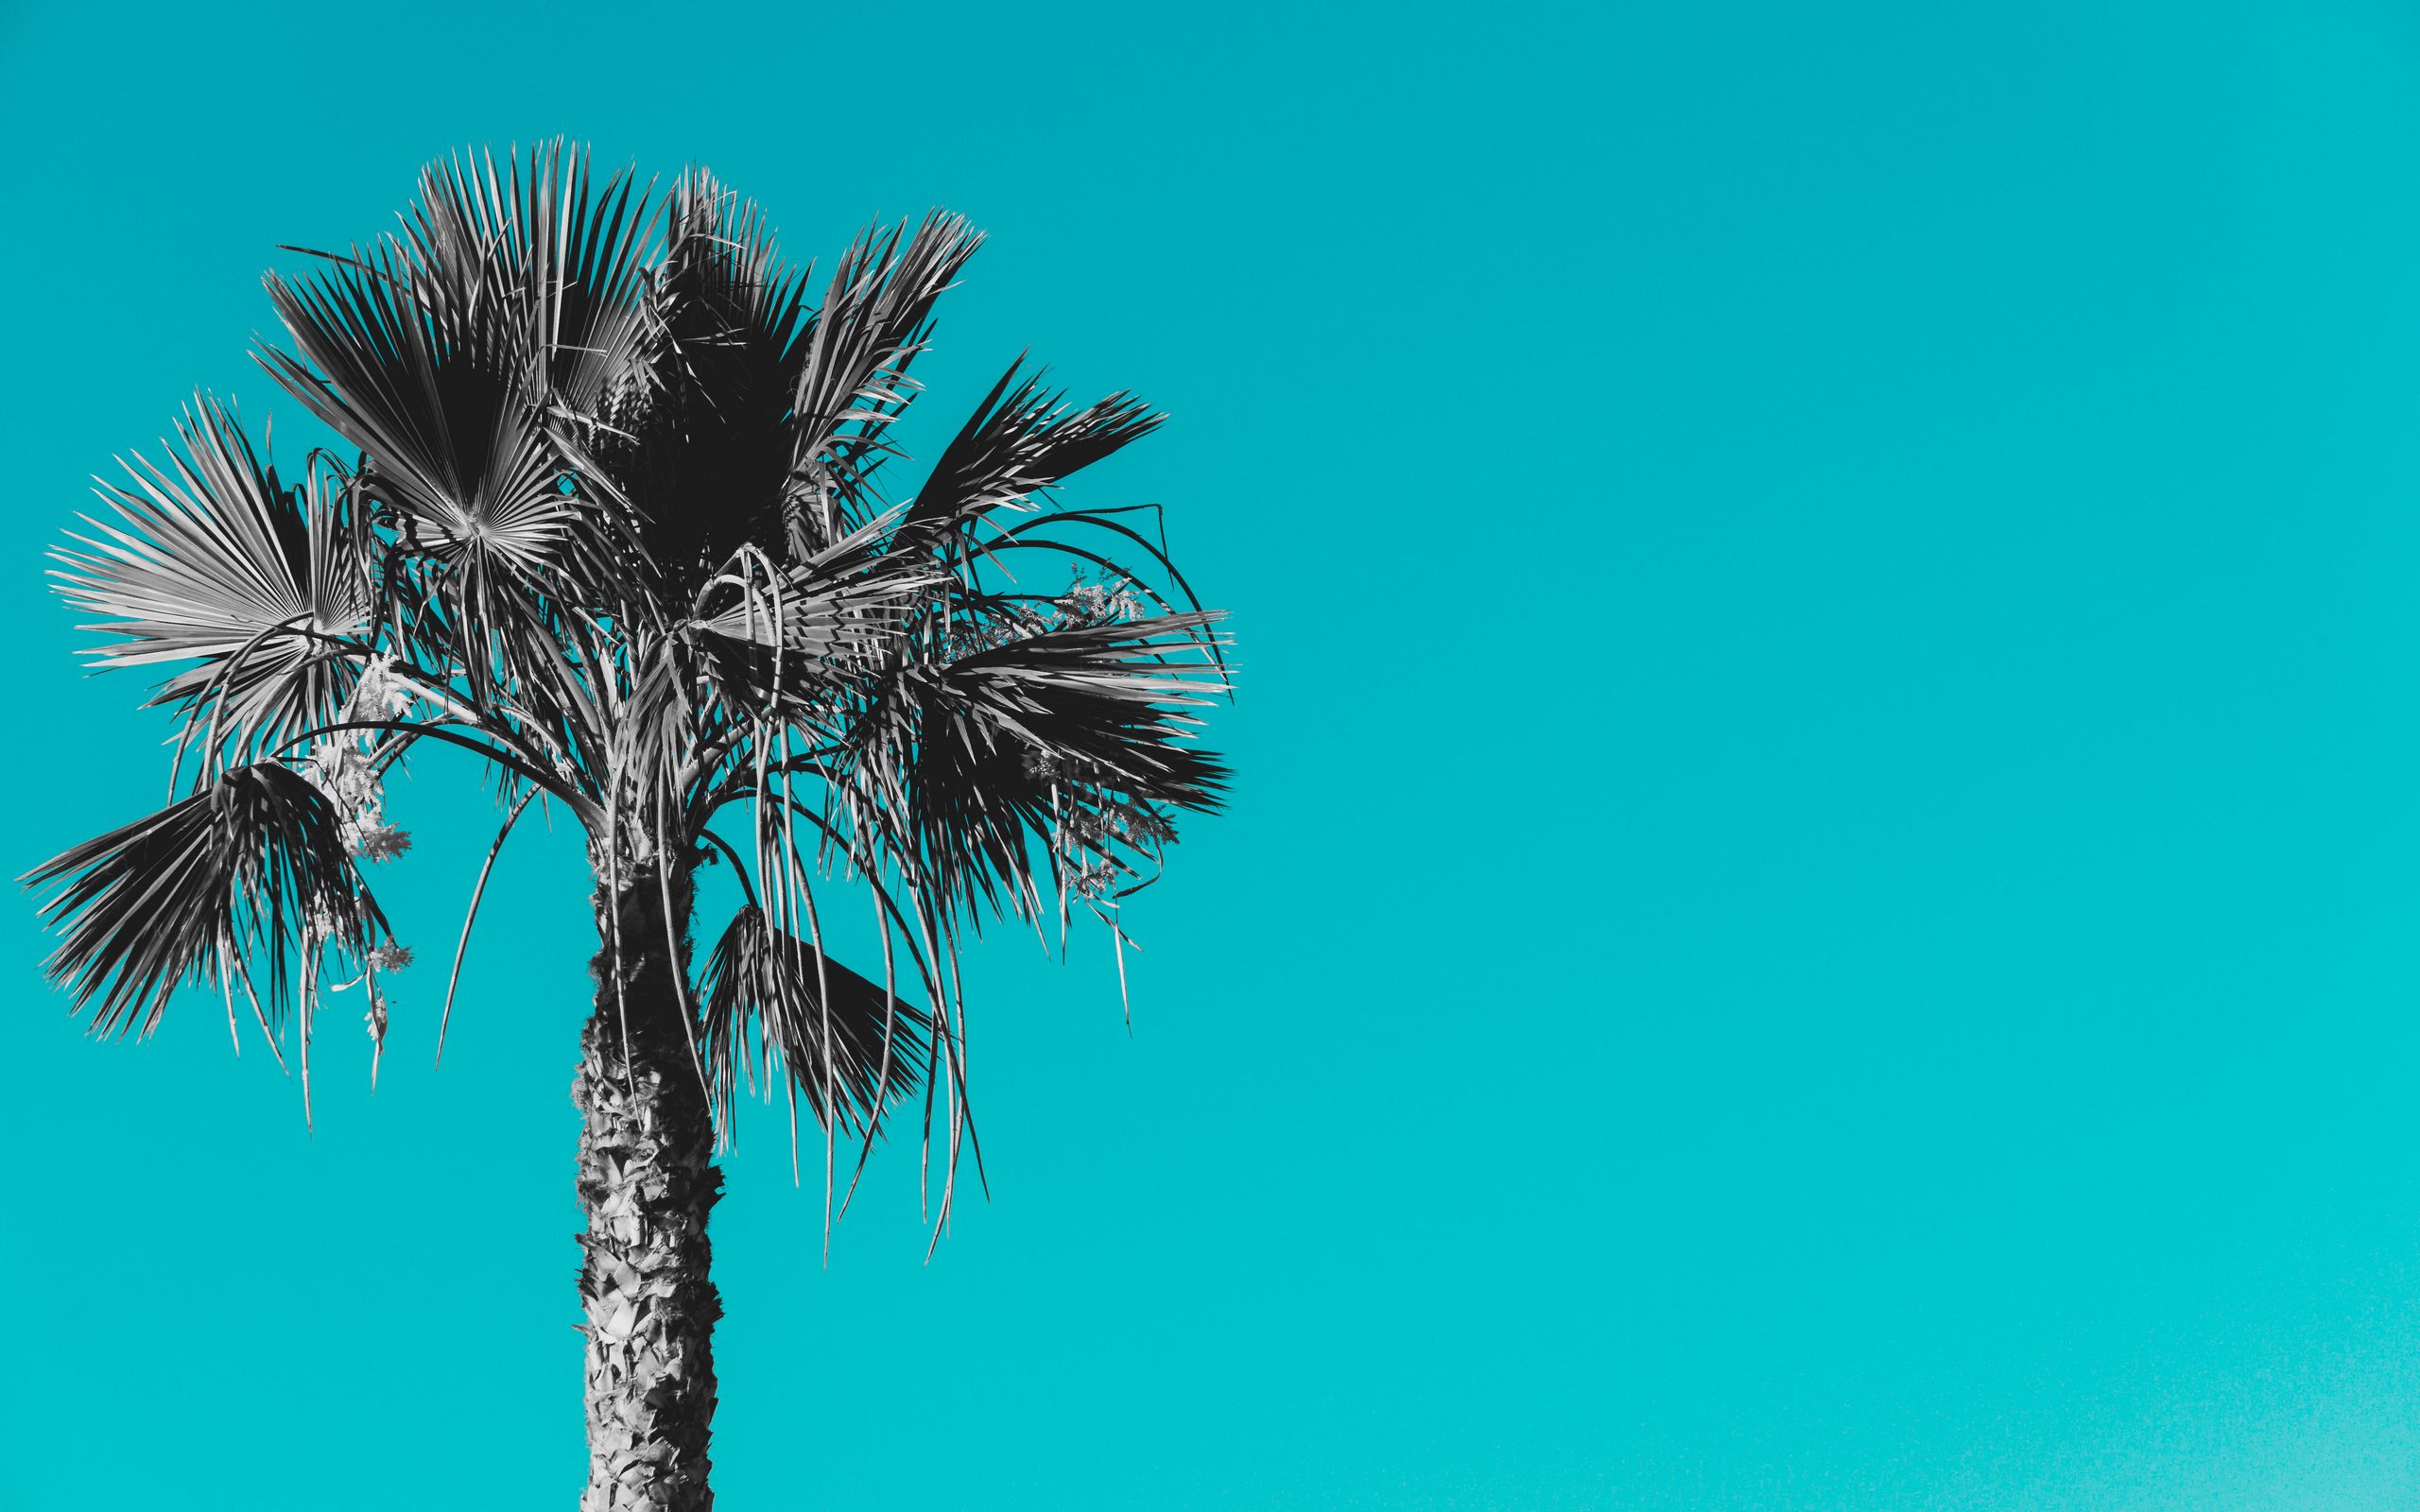 Download wallpaper 2560x1600 palm, tree, background, grey, blue